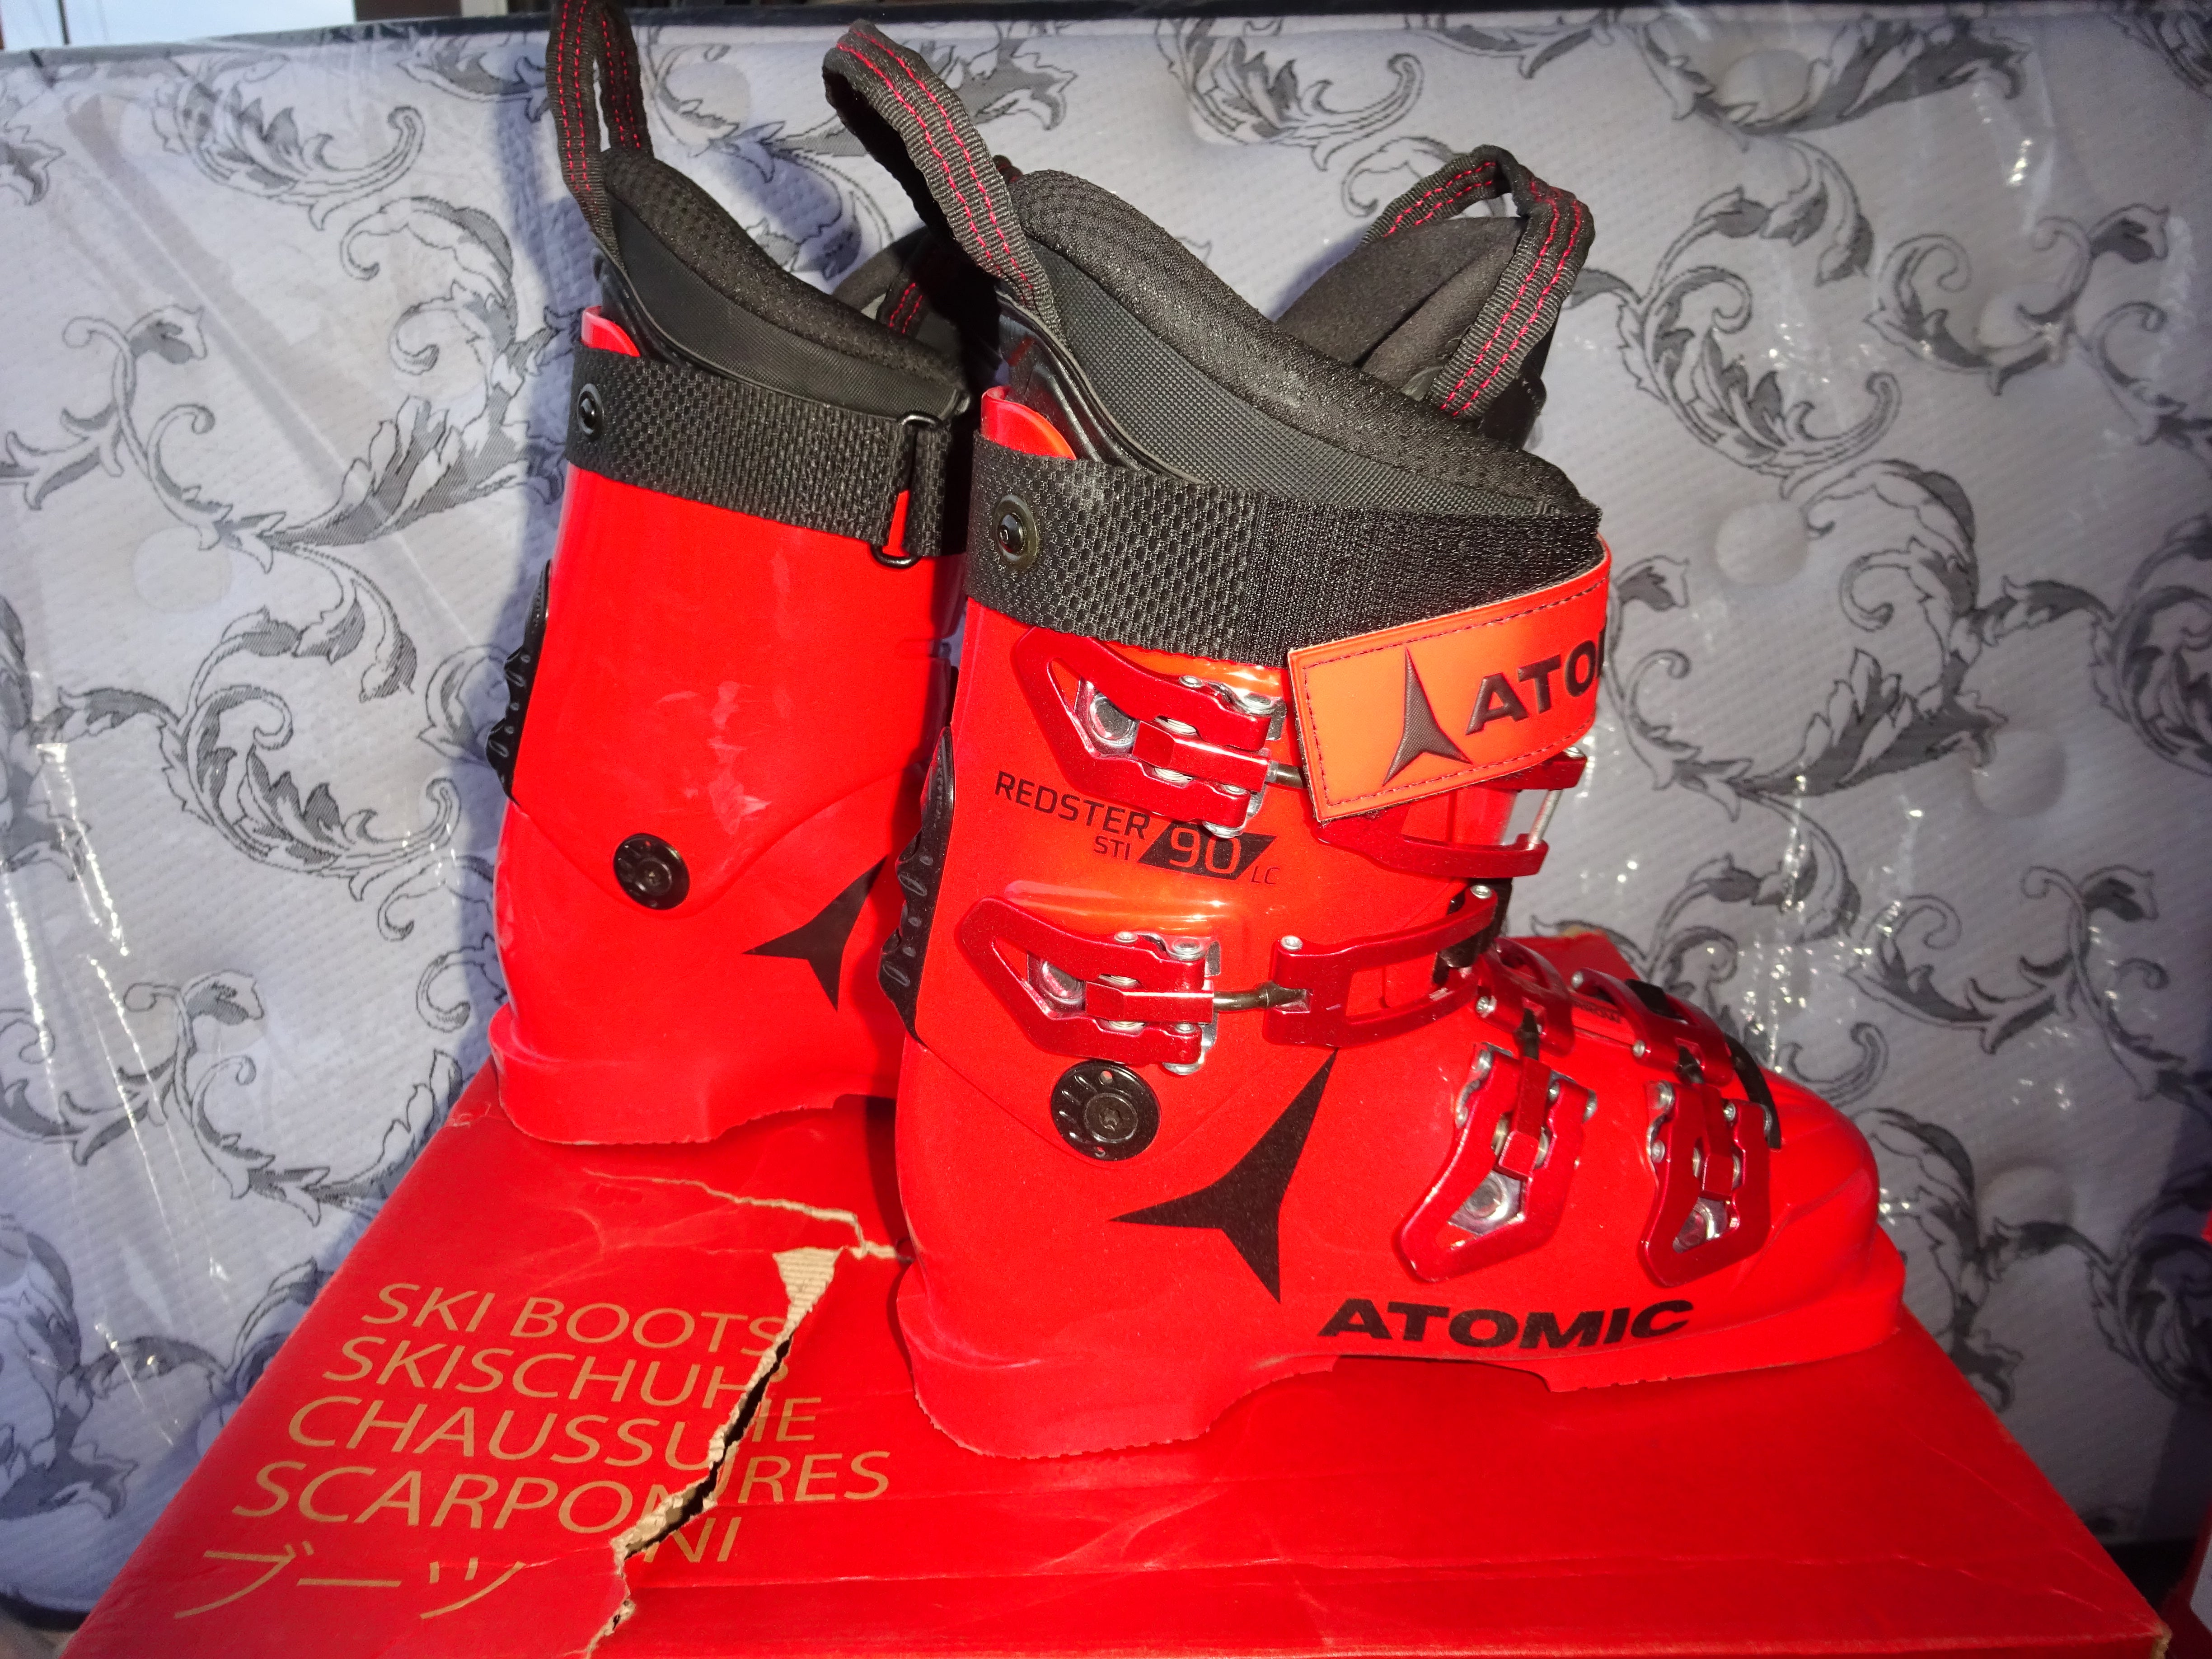 2022 Atomic Redster STI 90 Ski Boots! Size 23.5-Used for one